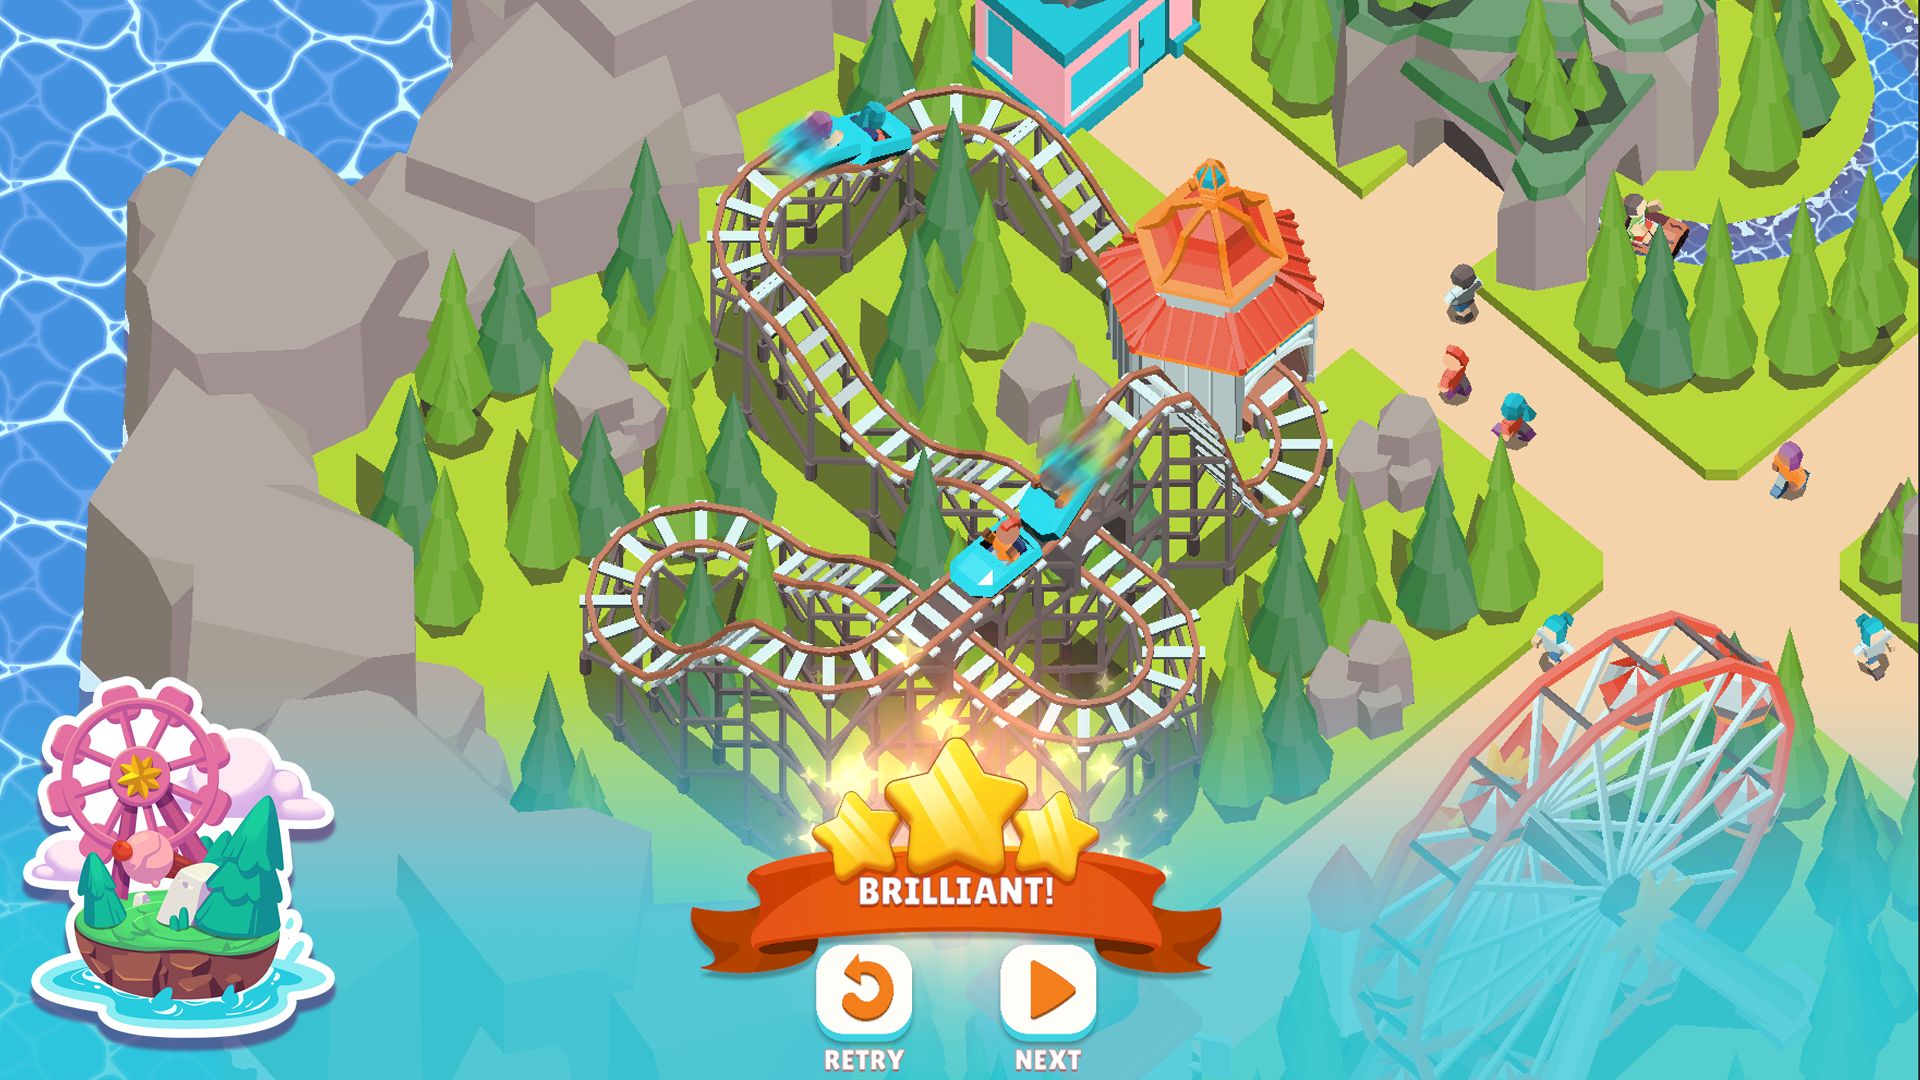 RollerCoaster Tycoon® Puzzle APK for Android Download